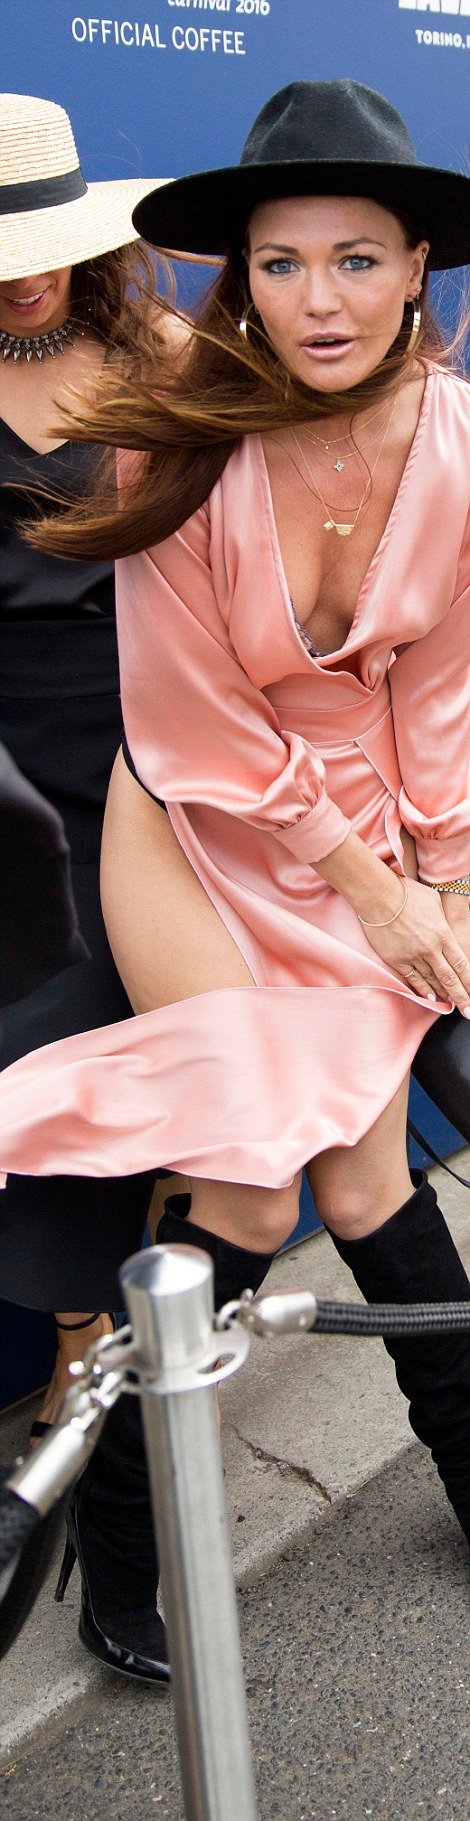 The former girlfriend of Lance 'Buddy' Franklin saw the windy conditions blow up her split pink dress. The model looked seemingly horrified as she struggled to contain her free-flowing gown and hide her black underwear